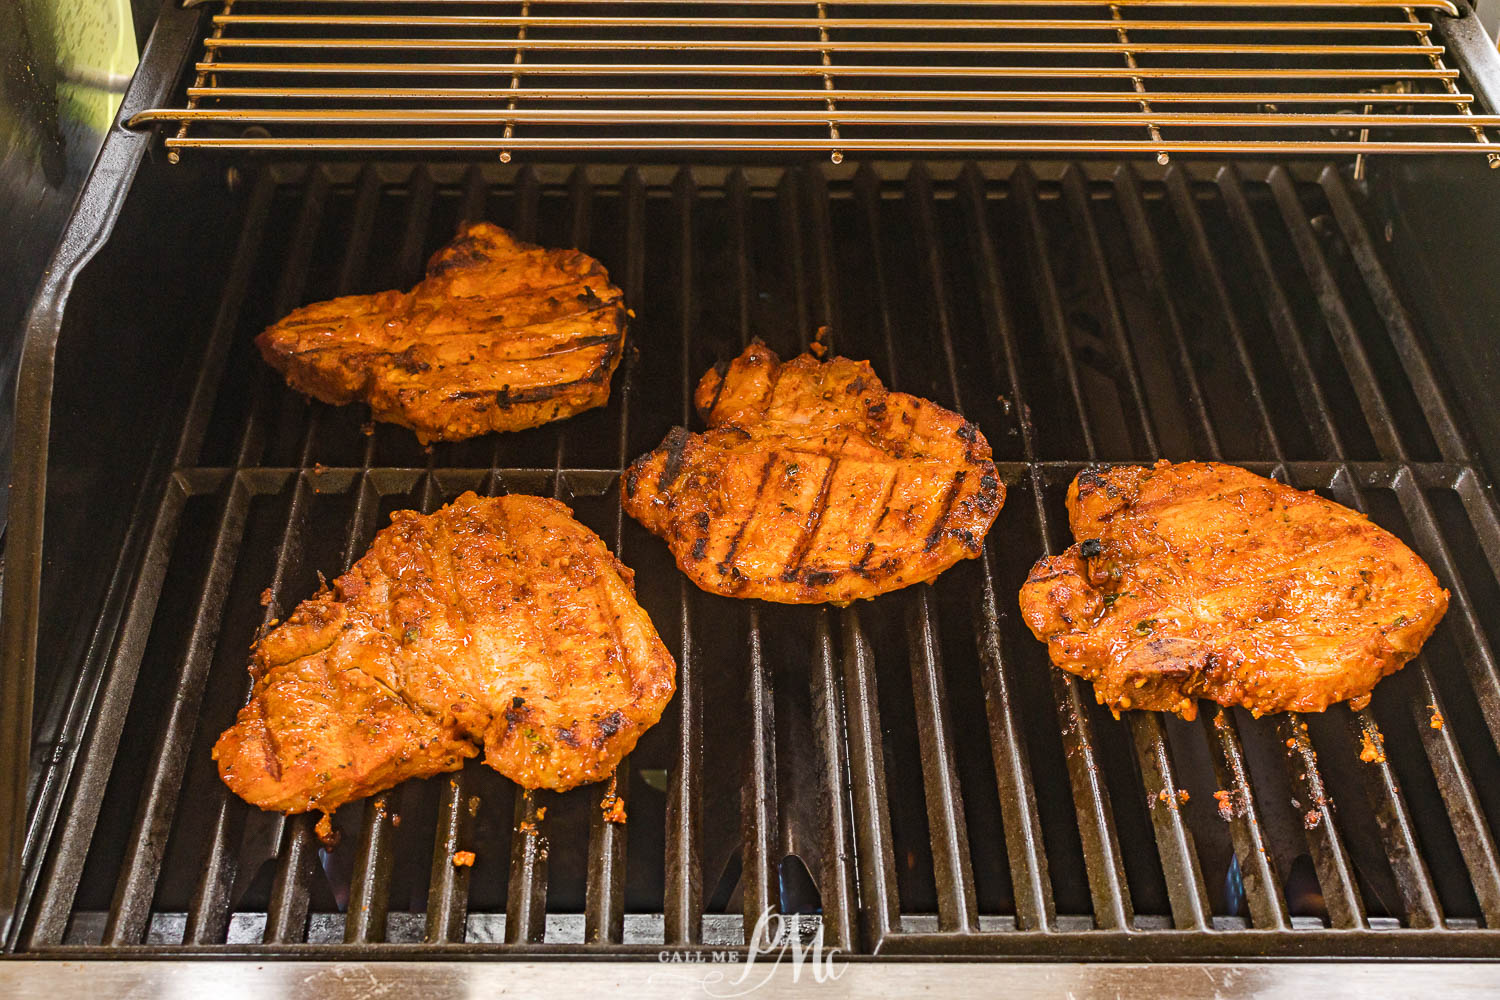 grilling pork chops on gas grill.